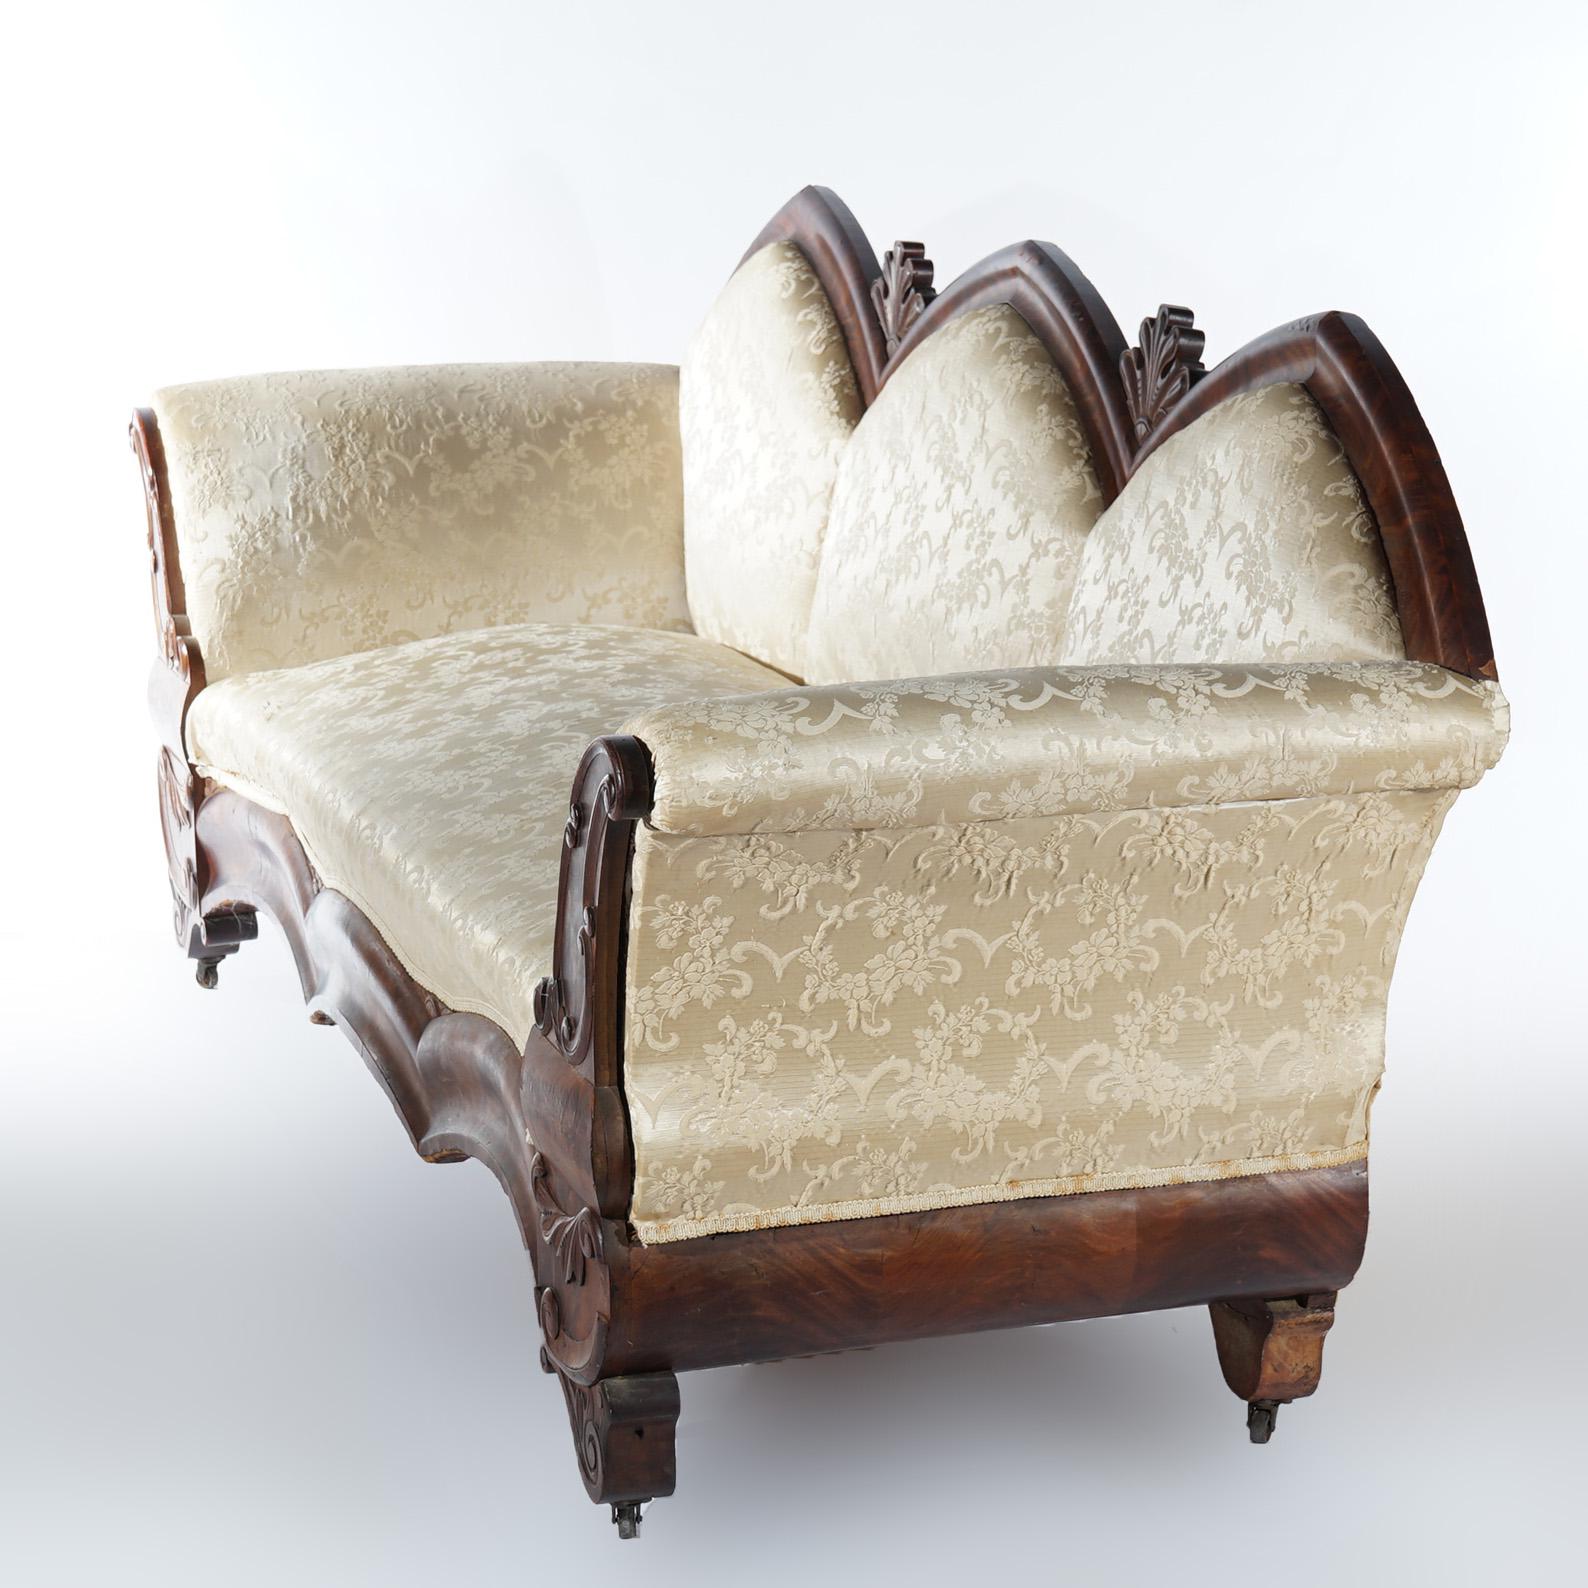 19th Century Antique Gothic Revival Classical Flame Mahogany Upholstered Sofa Circa 1850